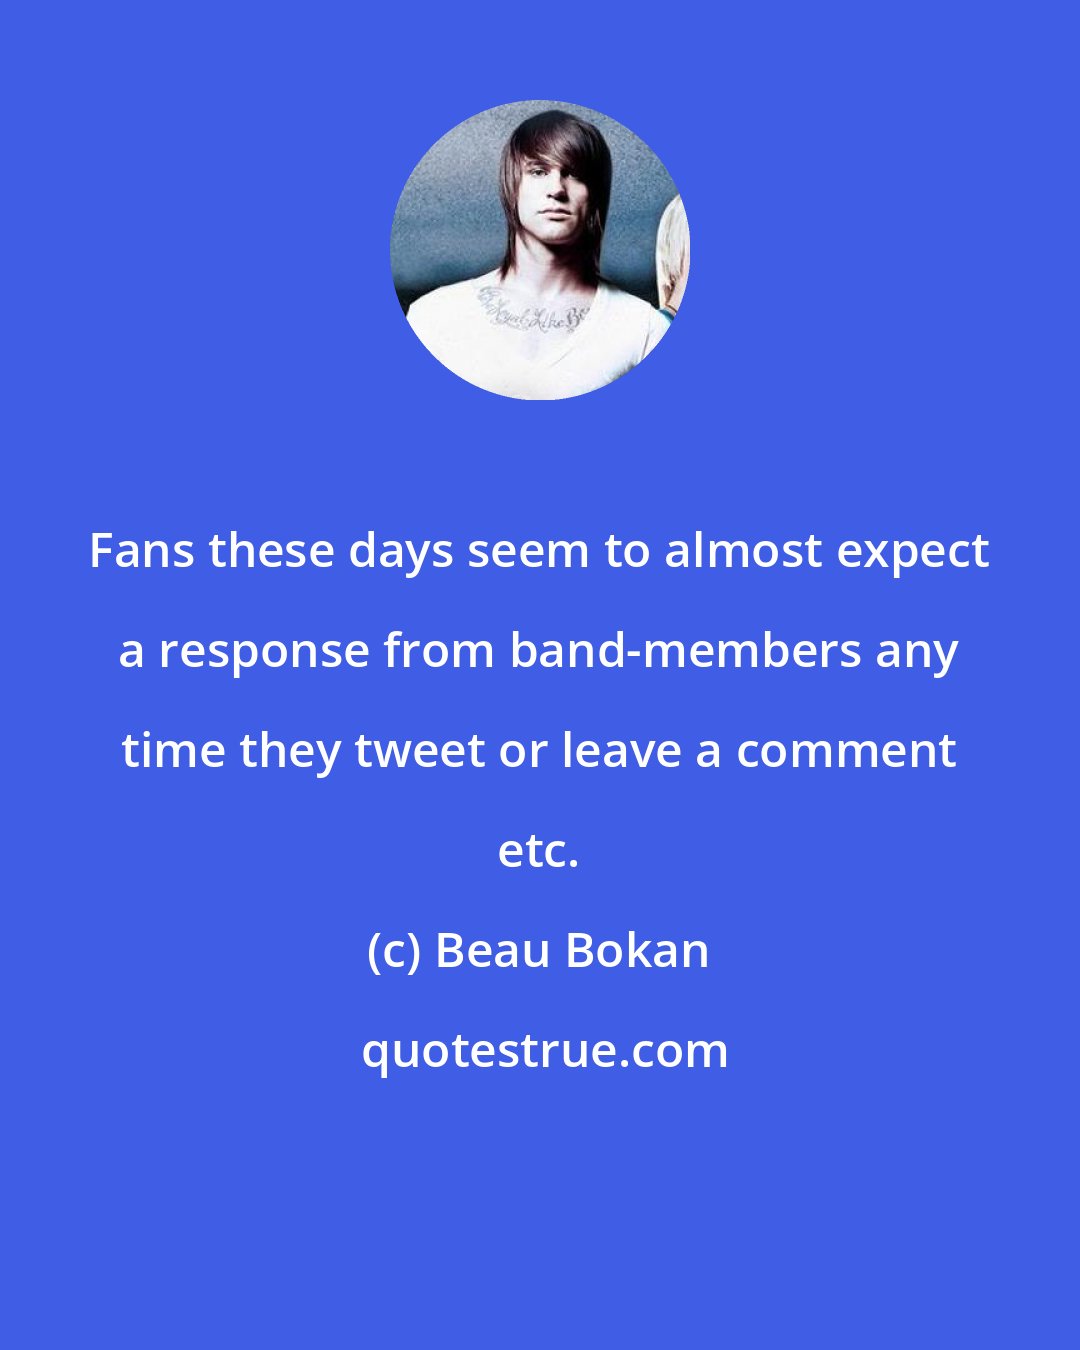 Beau Bokan: Fans these days seem to almost expect a response from band-members any time they tweet or leave a comment etc.